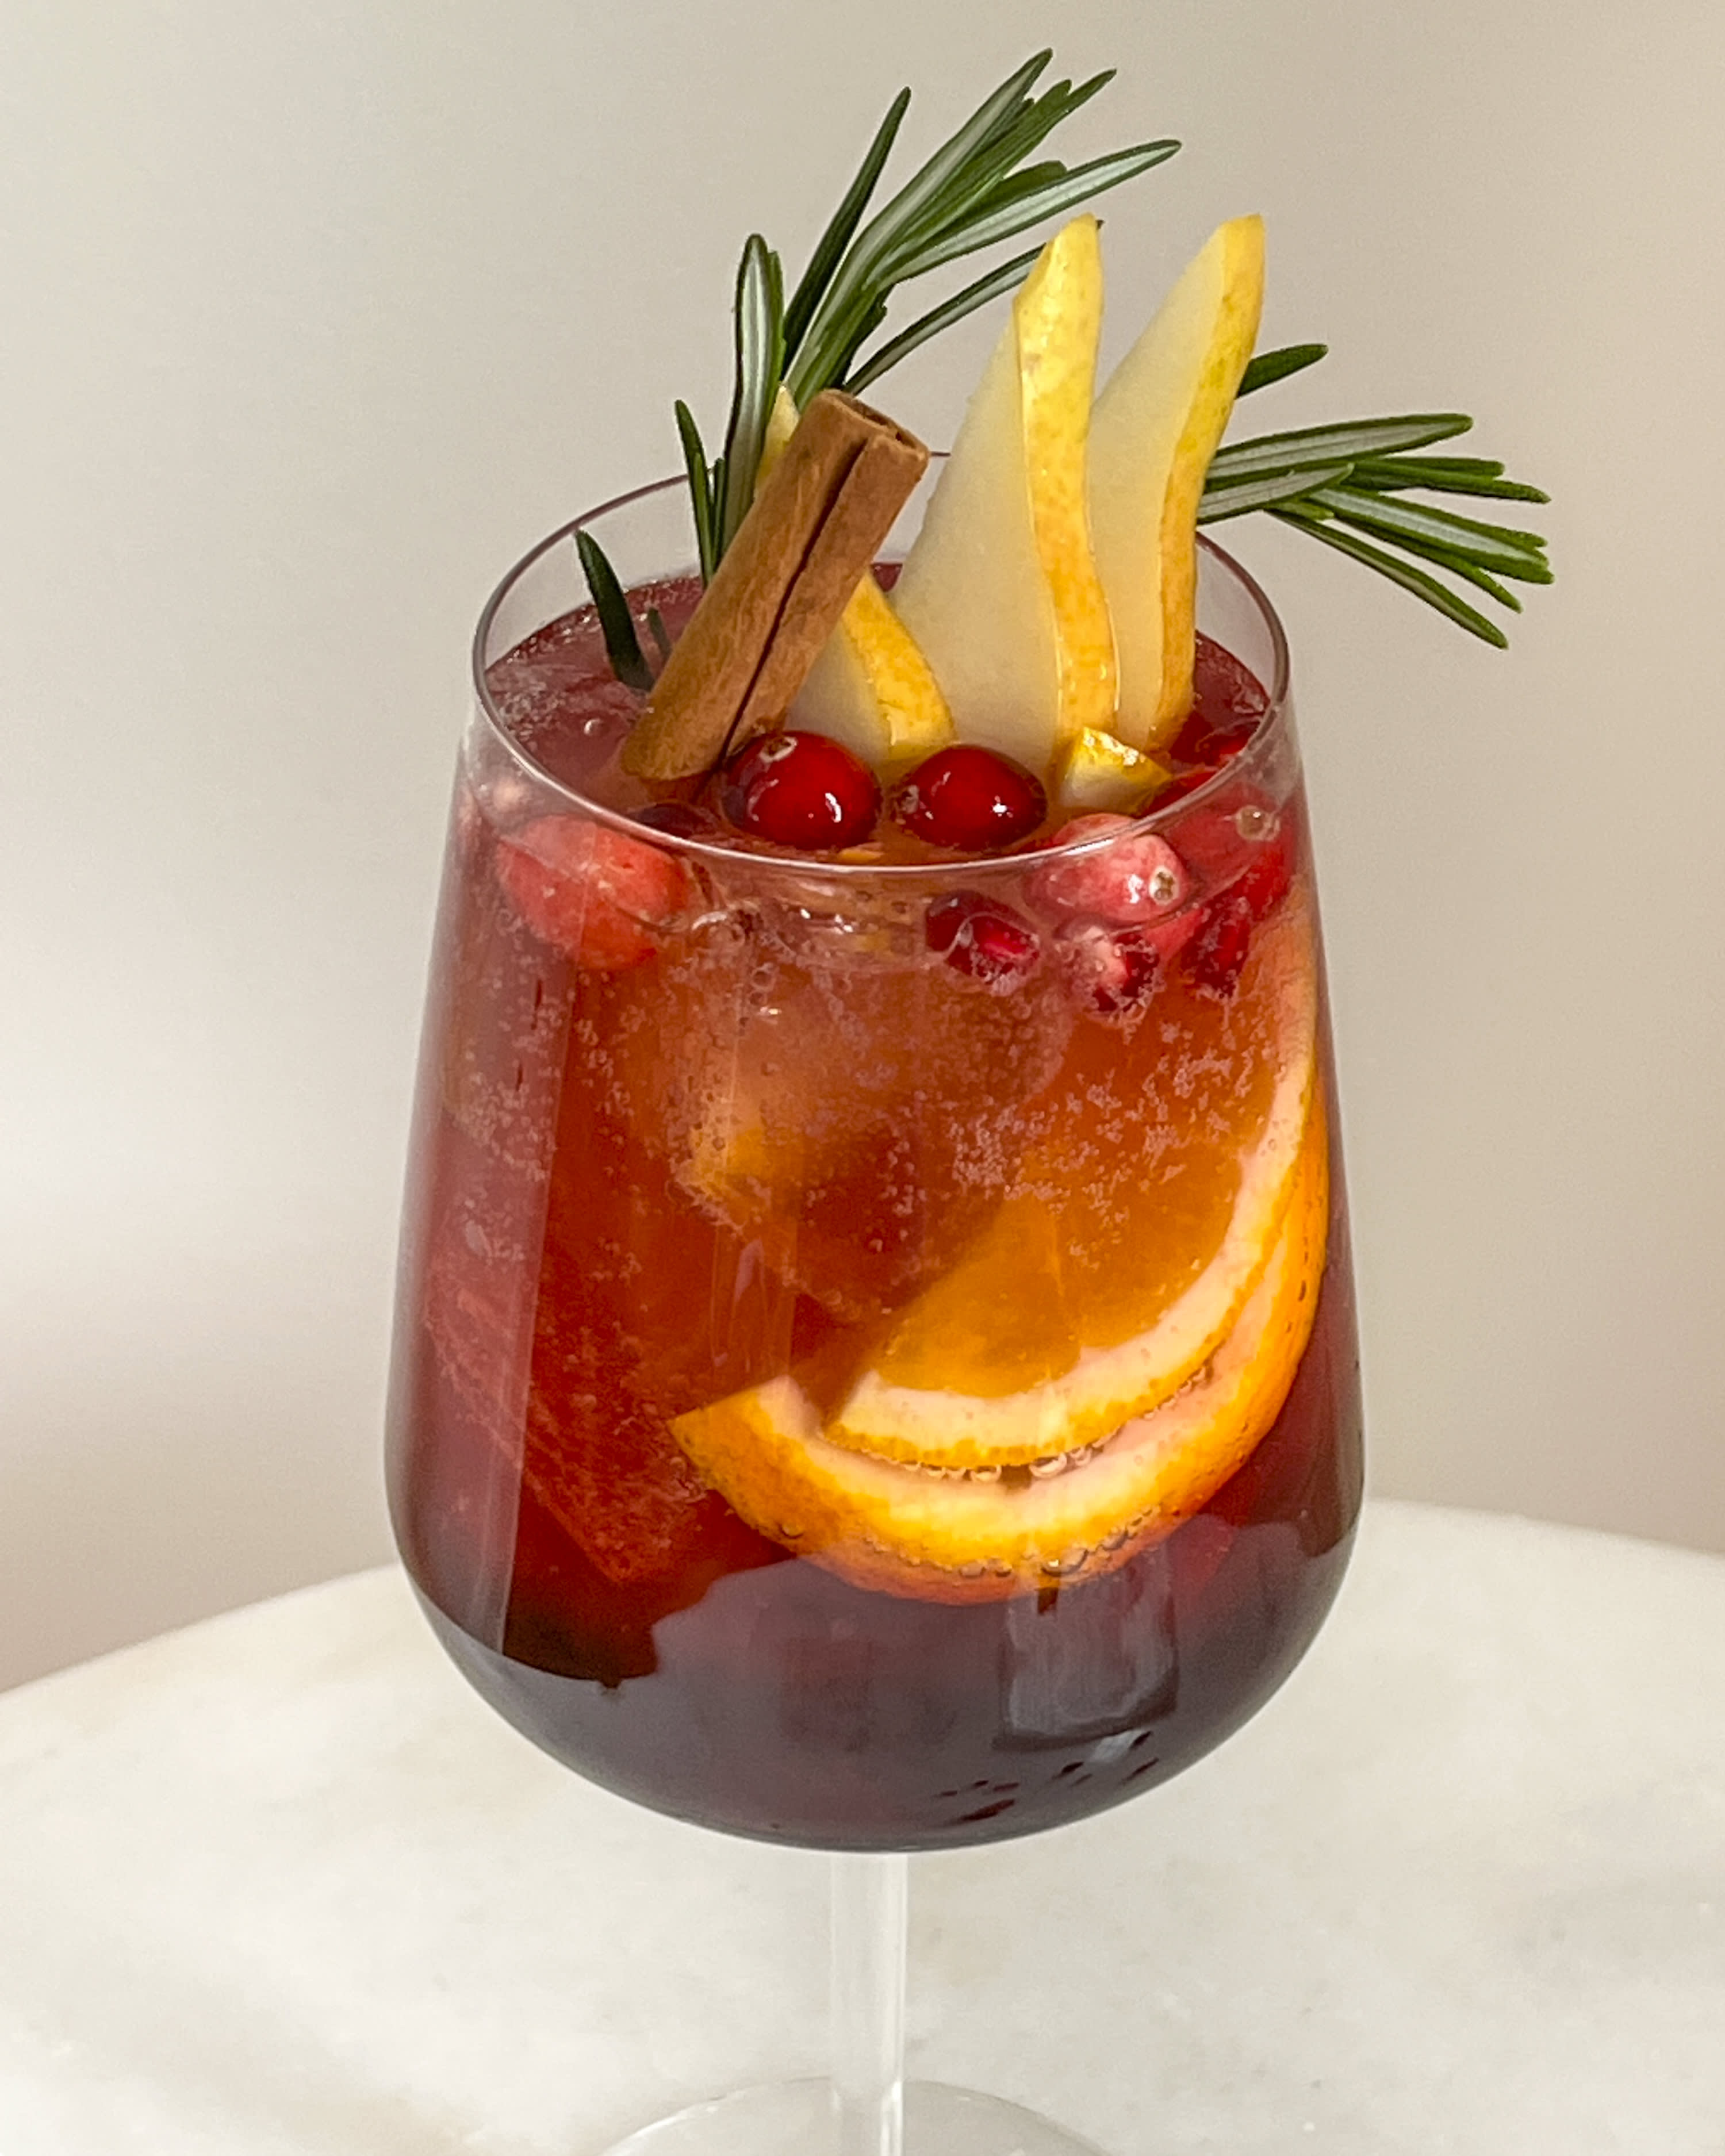 Holiday Sangria (Red Christmas Sangria) - Our Salty Kitchen